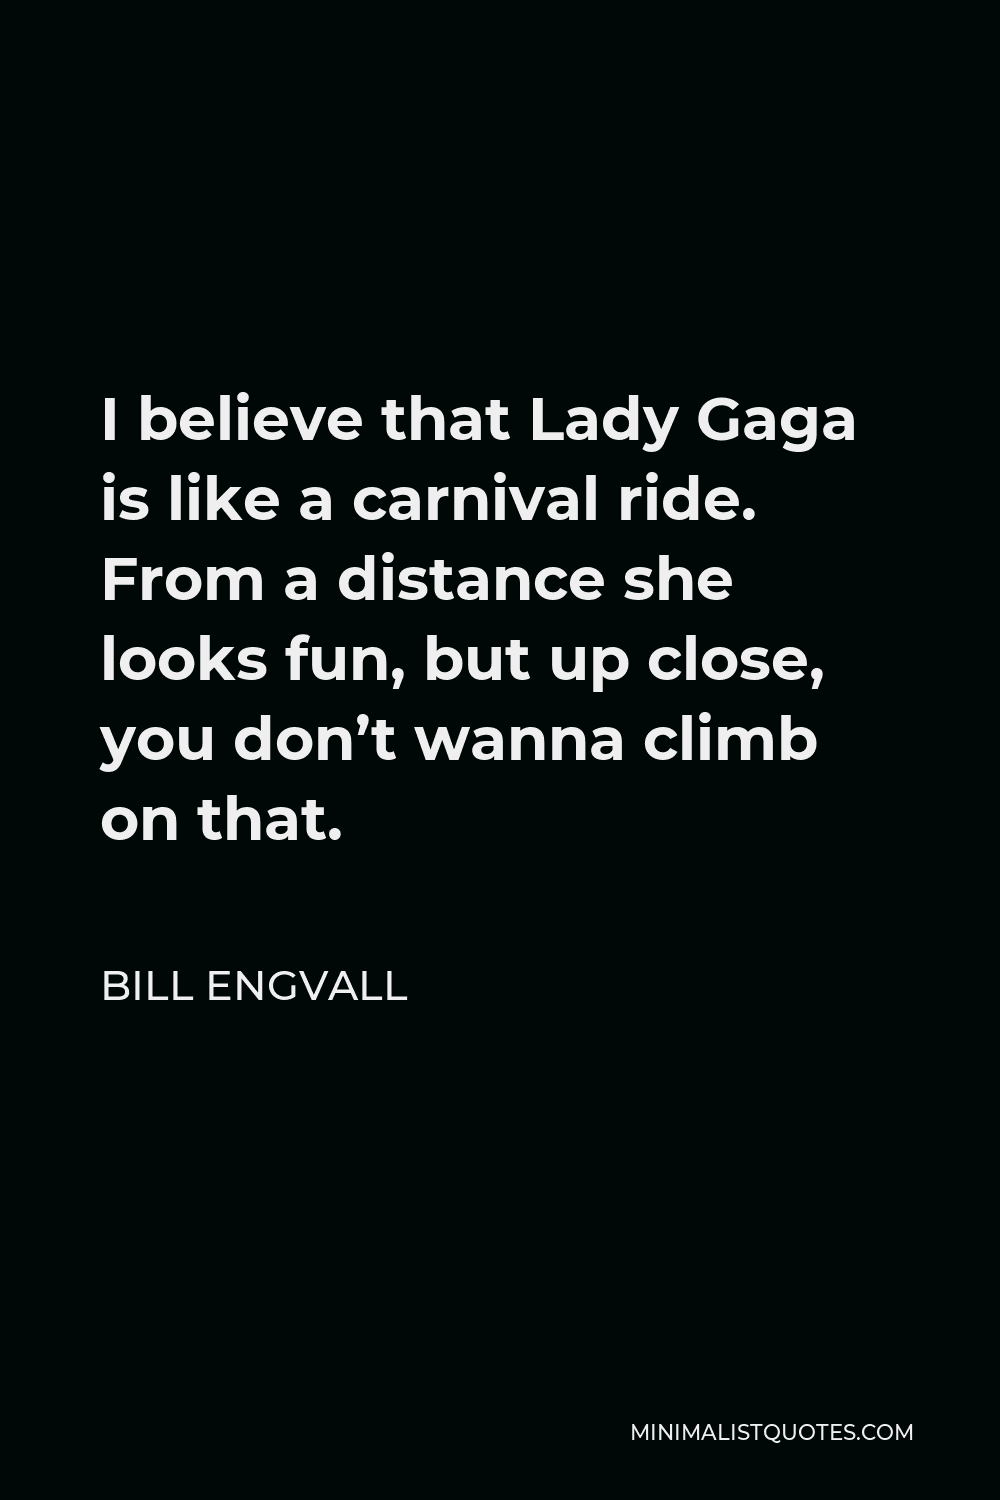 Bill Engvall Quote - I believe that Lady Gaga is like a carnival ride. From a distance she looks fun, but up close, you don’t wanna climb on that.